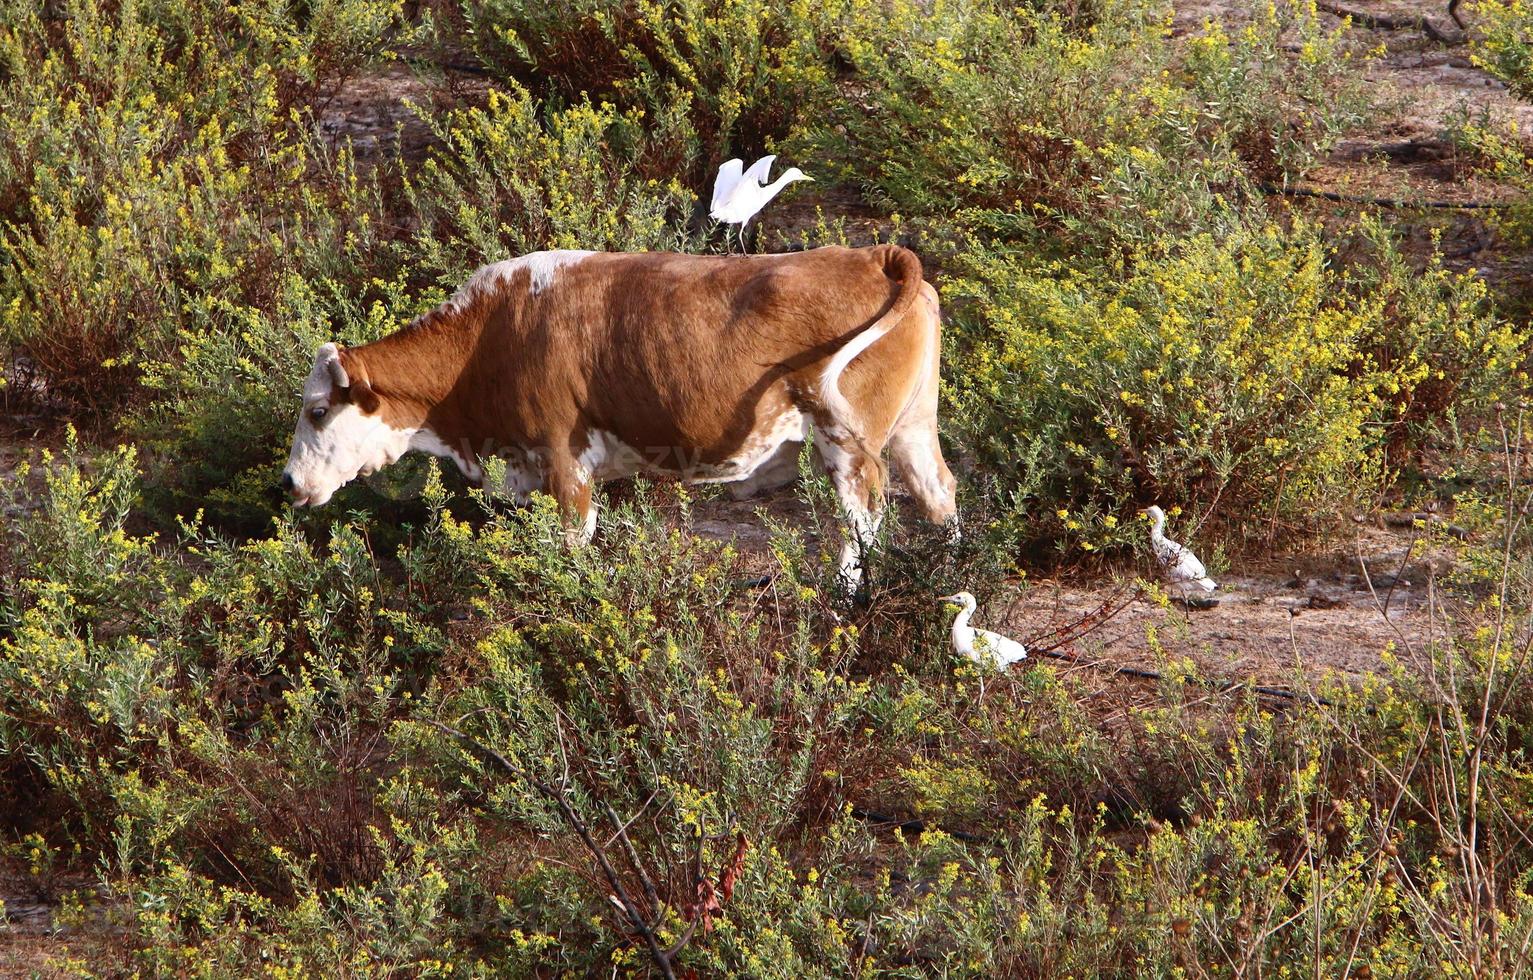 A herd of cows graze in a forest clearing in northern Israel. photo